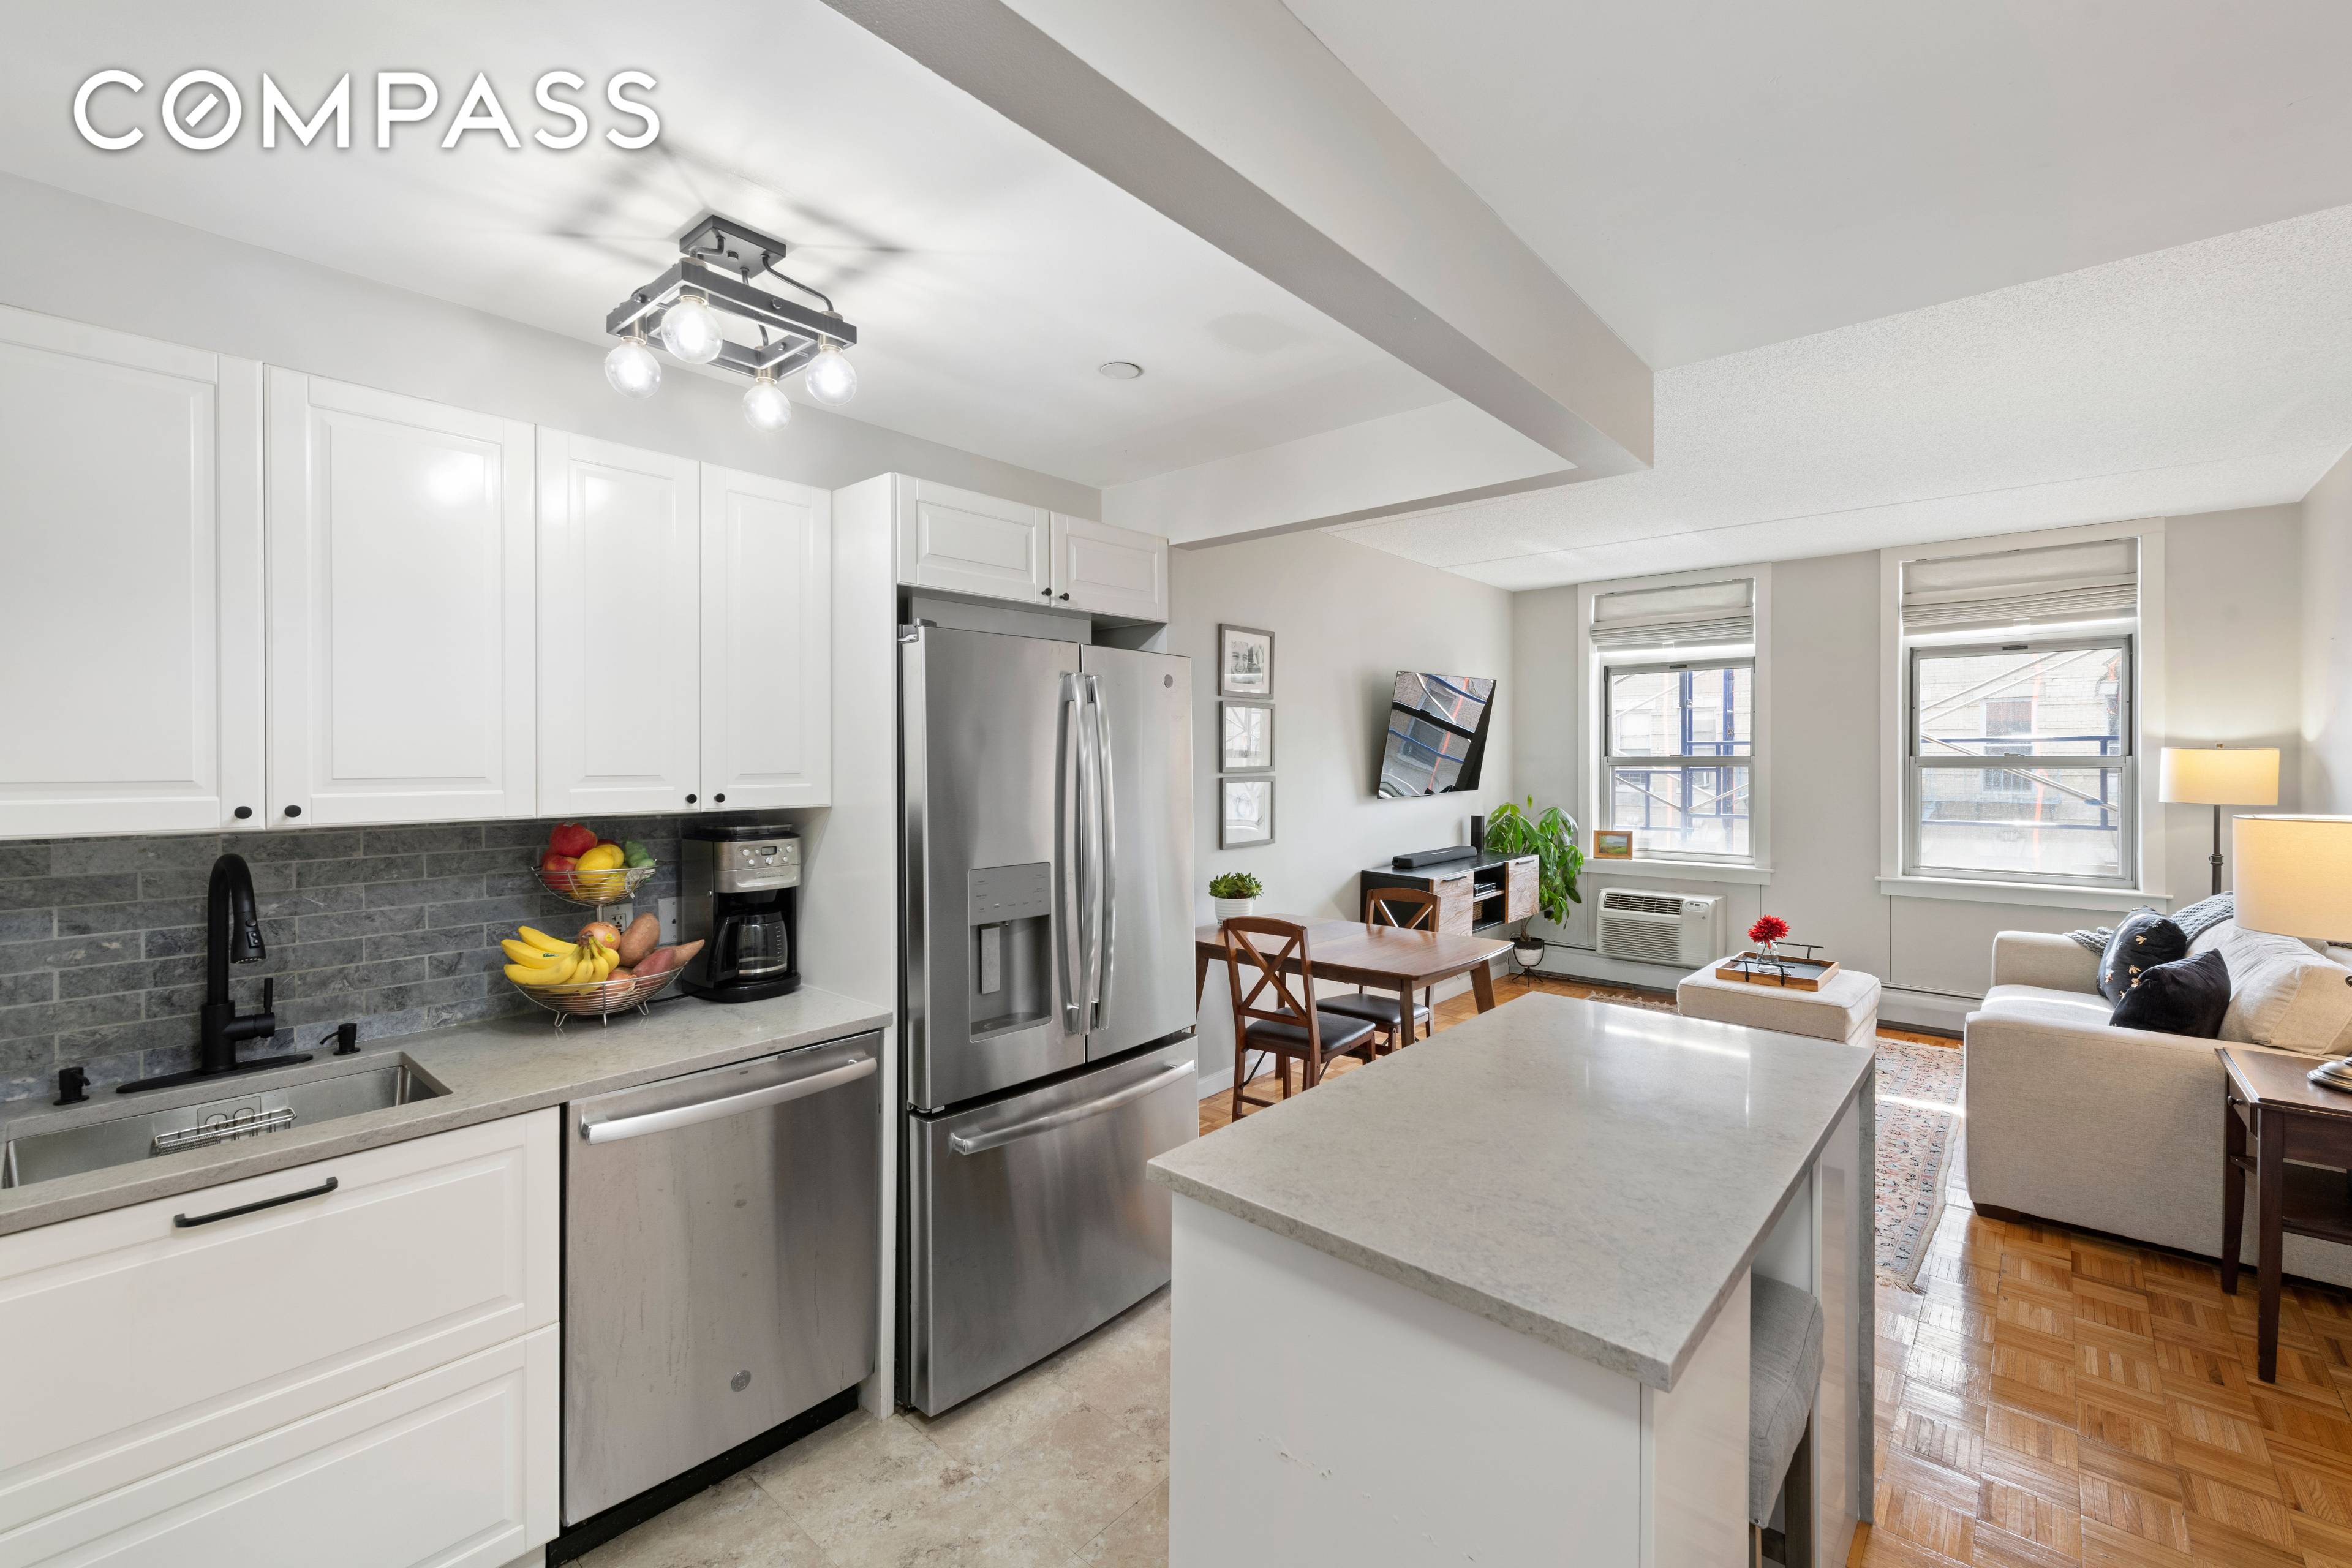 Nestled on a quiet, tree lined street in Harlem, apartment 612 at 102 Bradhurst is a generously sized 2 bedroom, 1 bath co op that has been meticulously renovated.